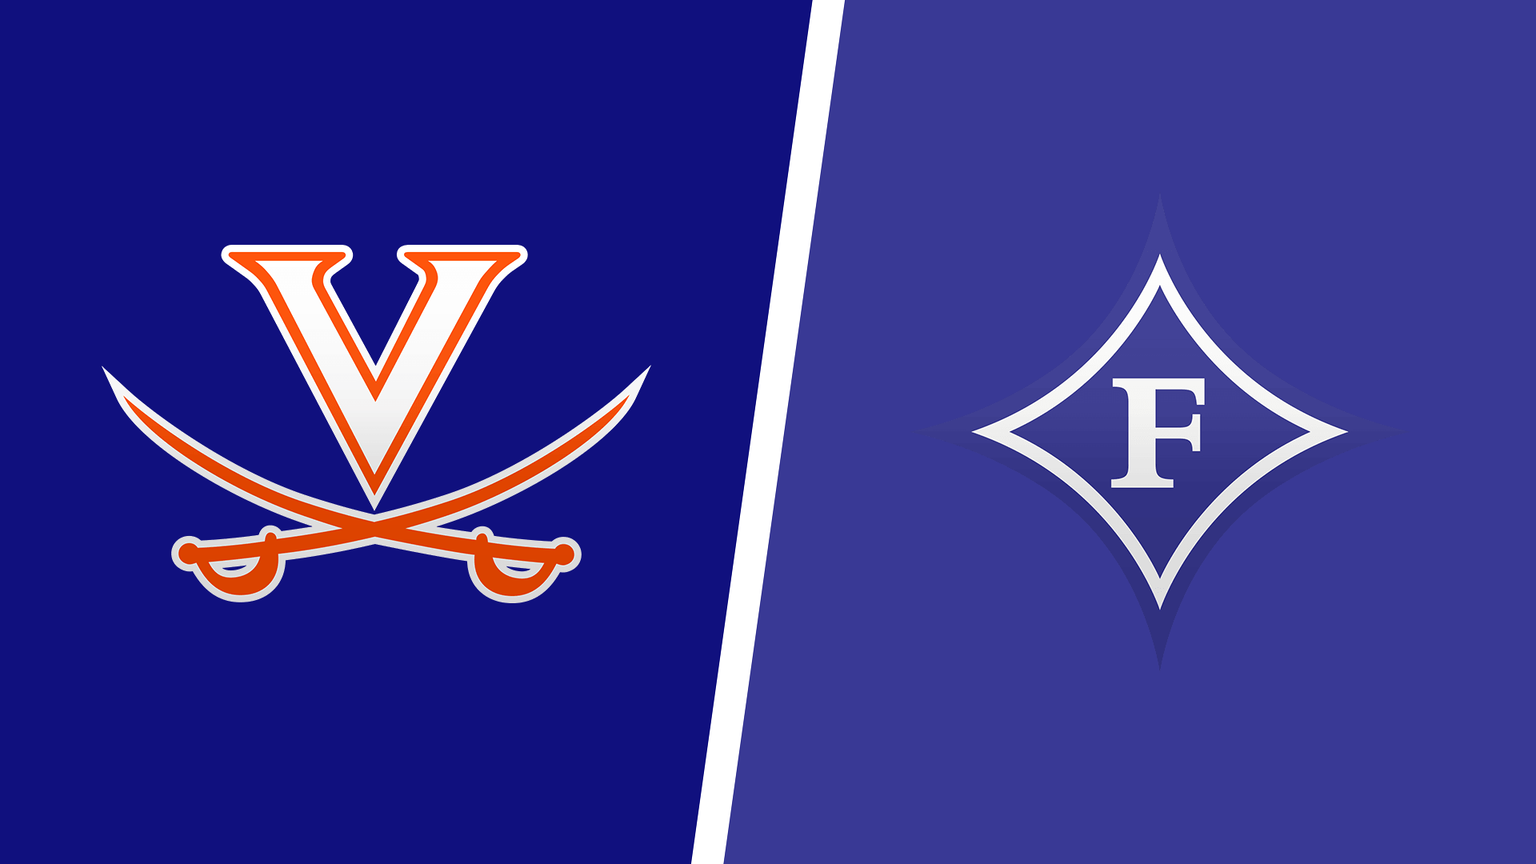 How to Watch Furman vs. Virginia Game Live Online on March 16, 2023